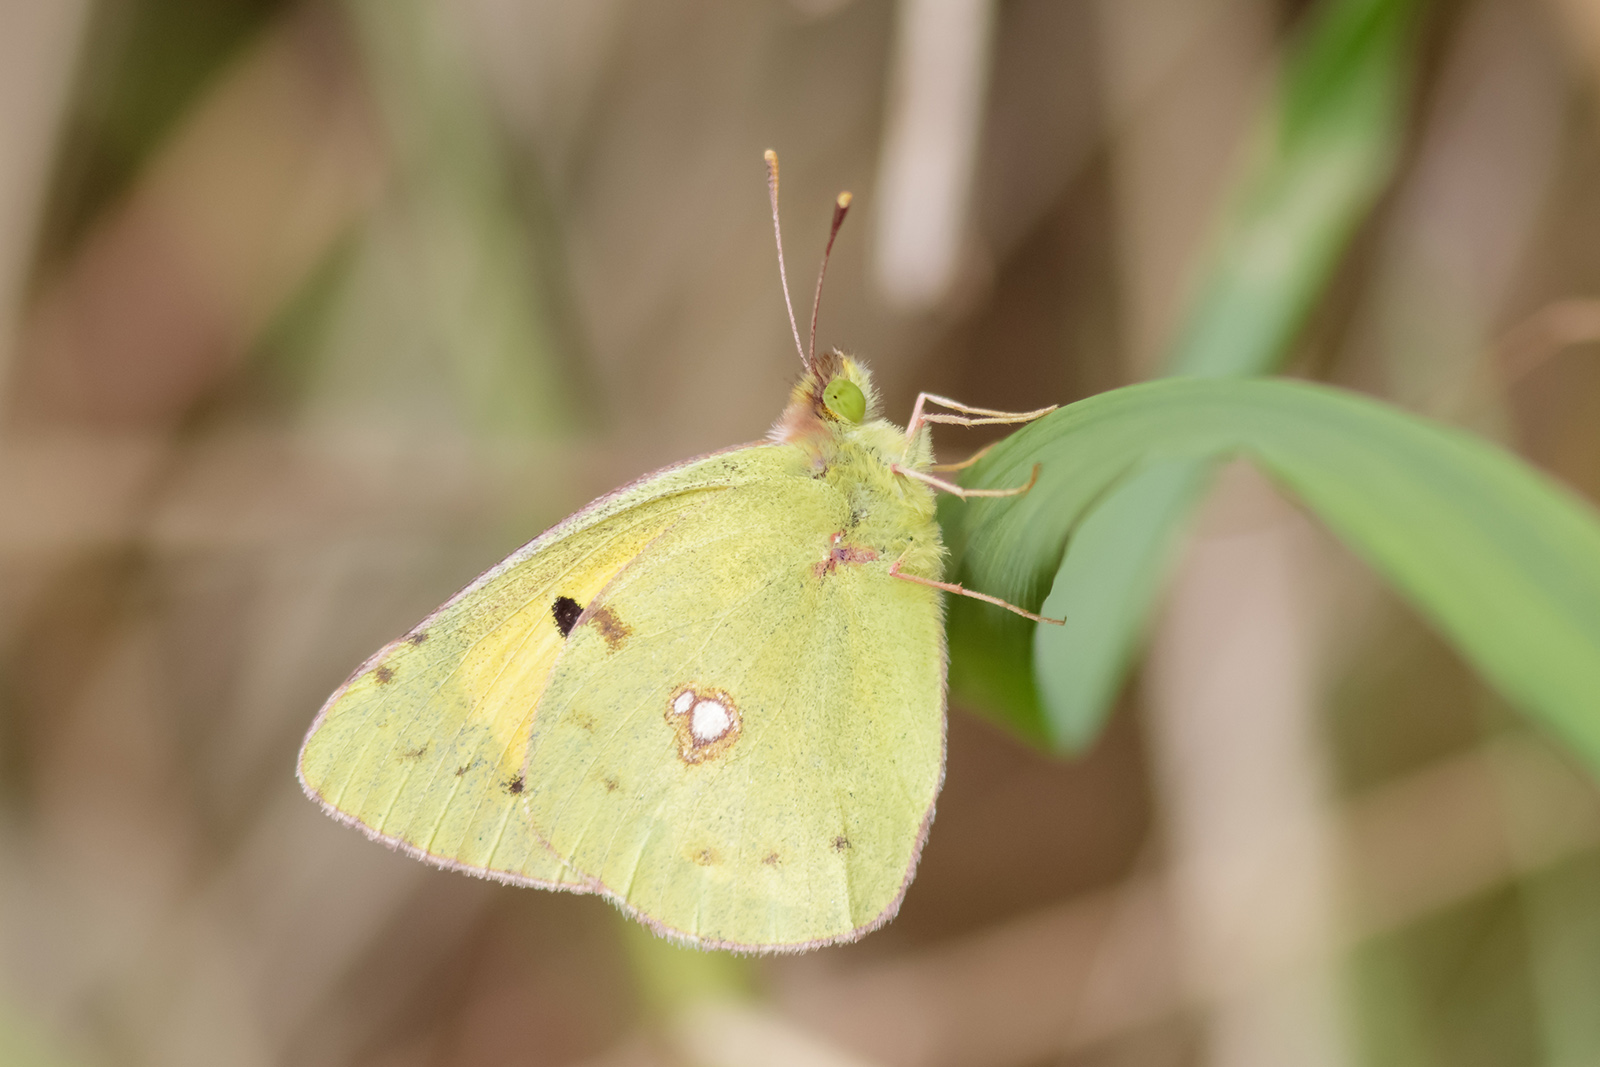 A photo of a soft yellow butterfly perched on a leaf.